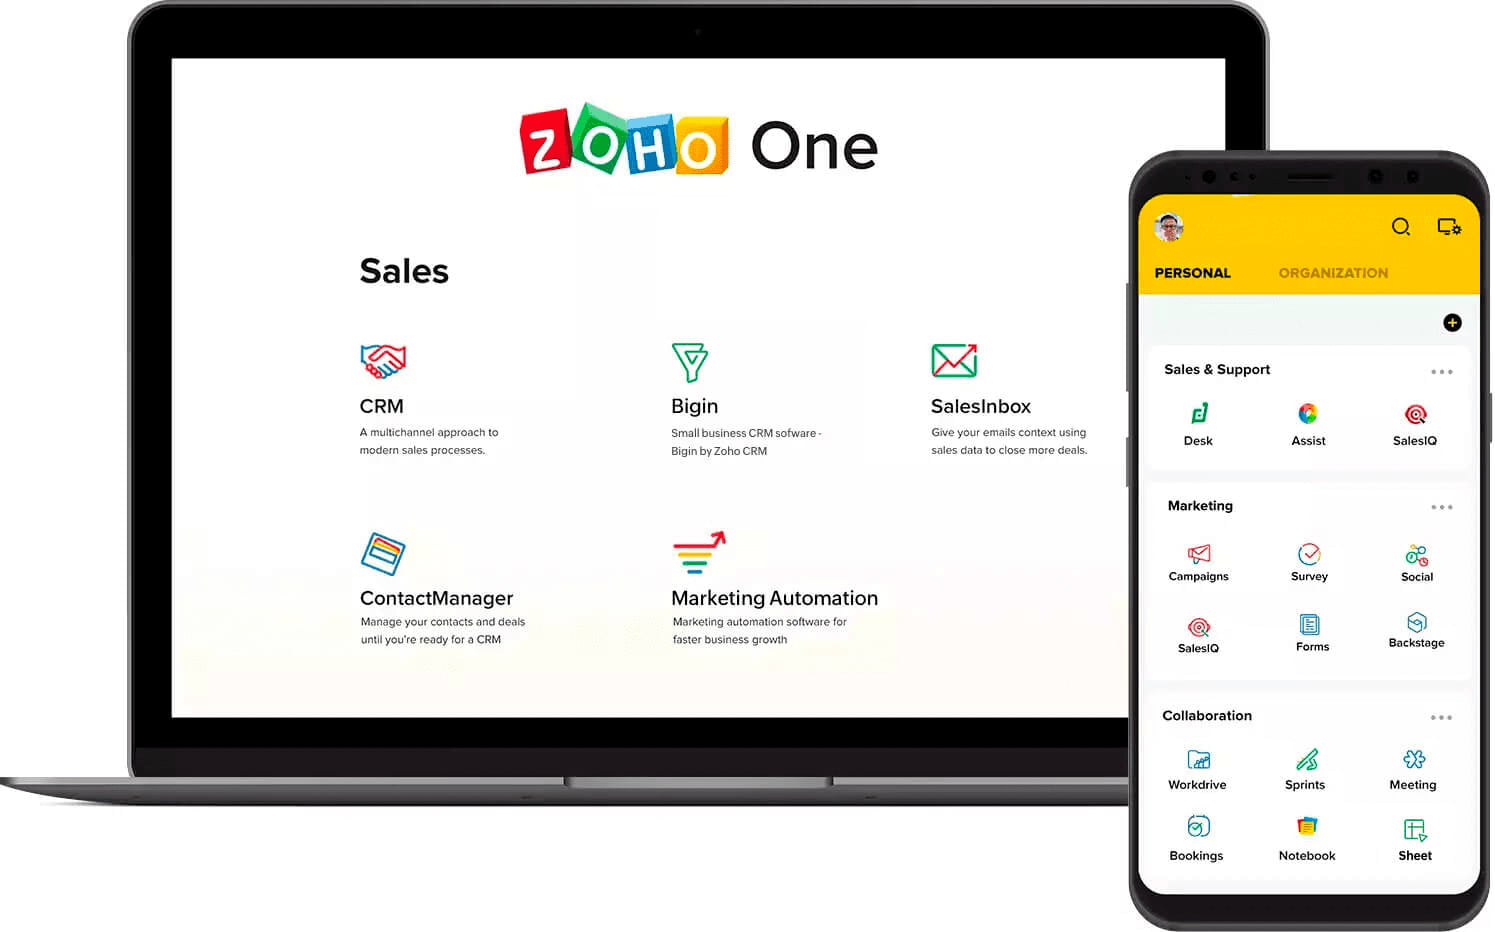 How much you can save with Zoho One?